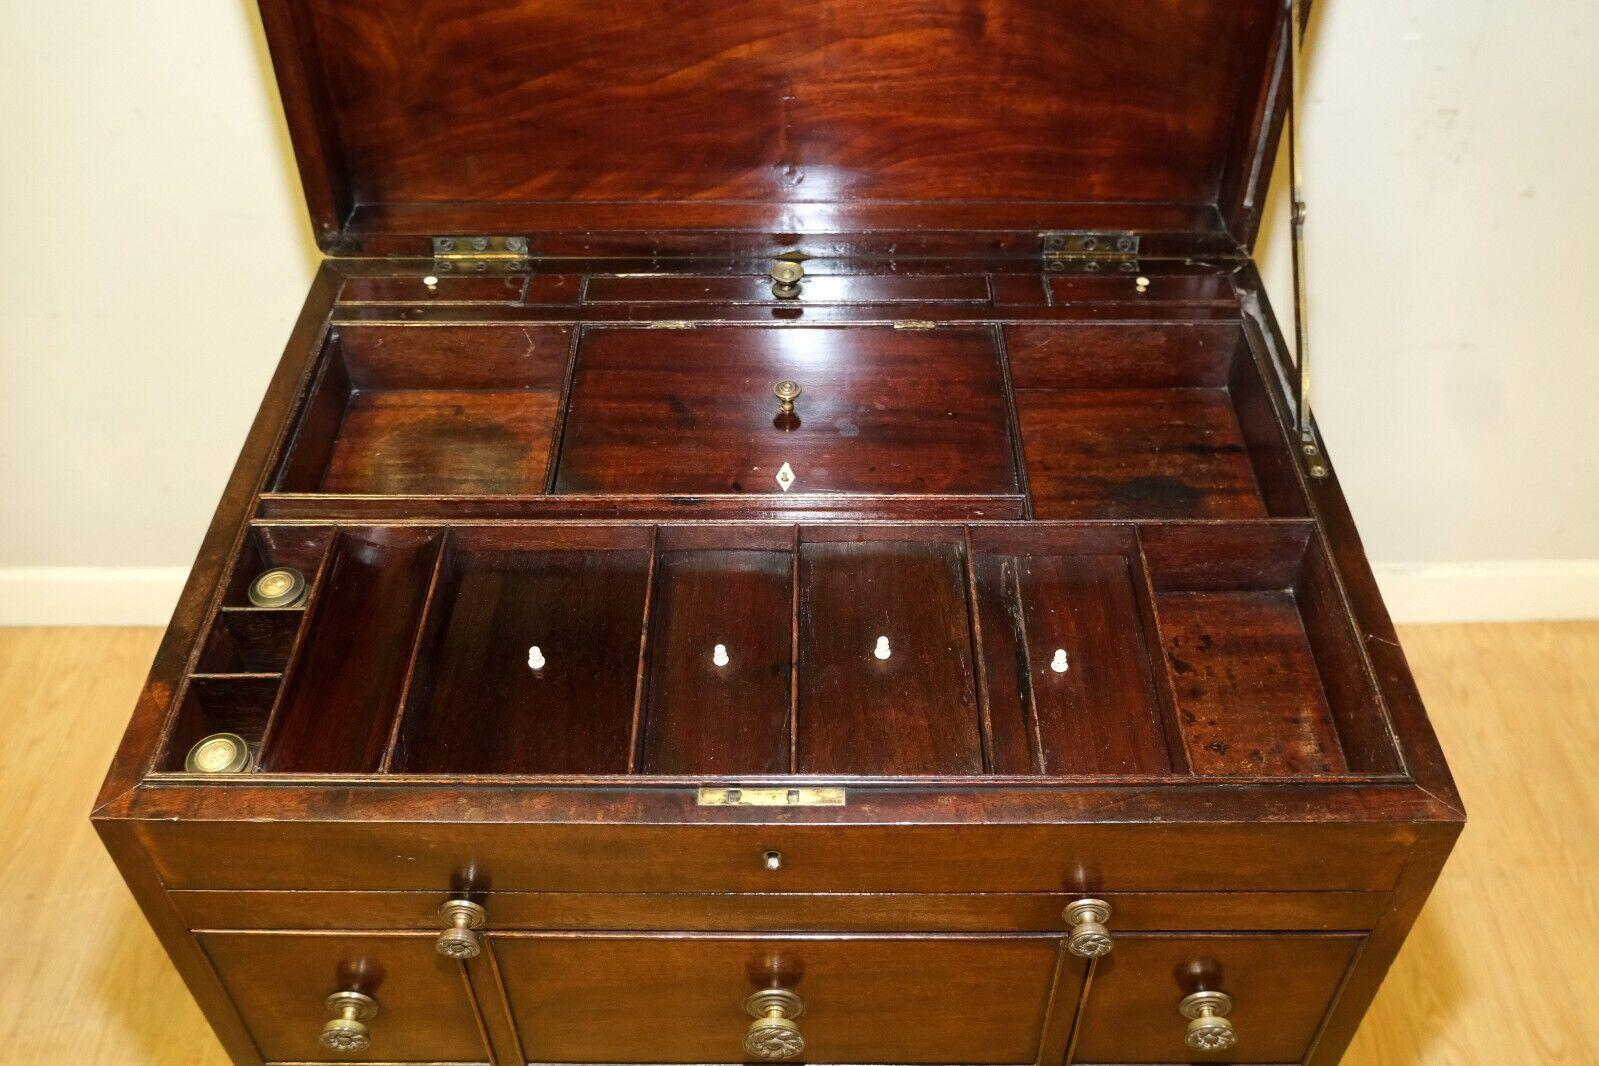 Hand-Crafted Antique GEORGIAN OFFICER'S MILITARY CAMPAIGN DRESSiNG CHEST WITH WRITING SLOPE